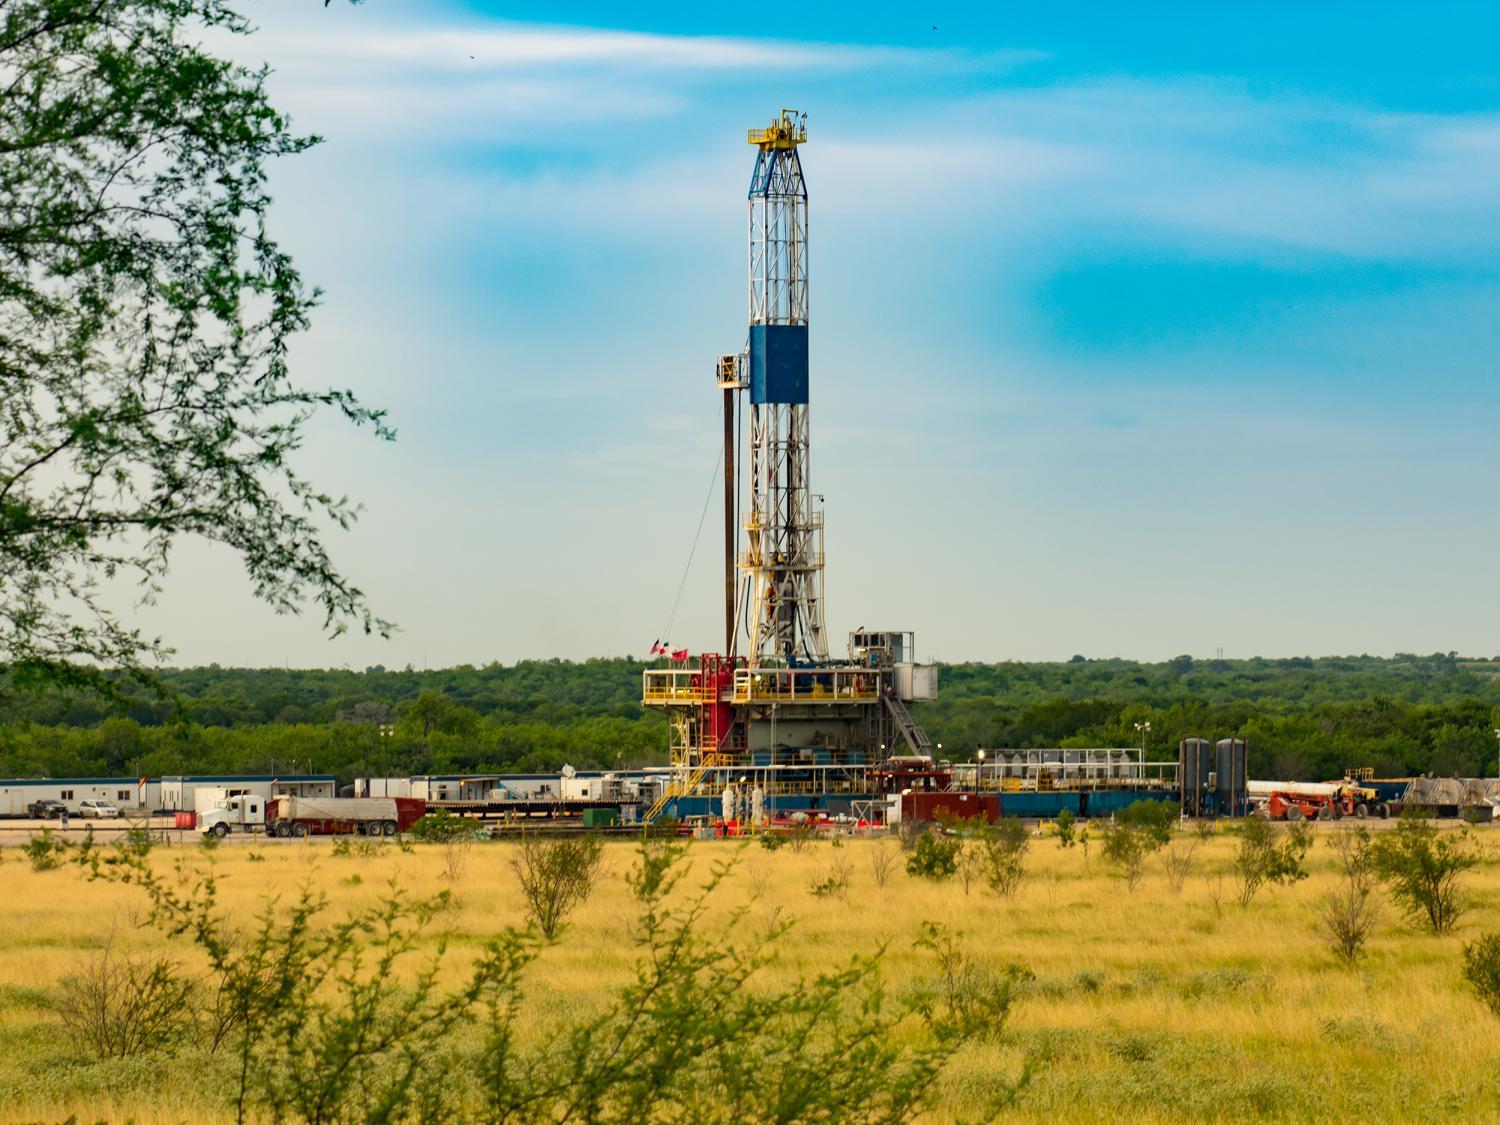 A fracking platform on a gas well drilling site